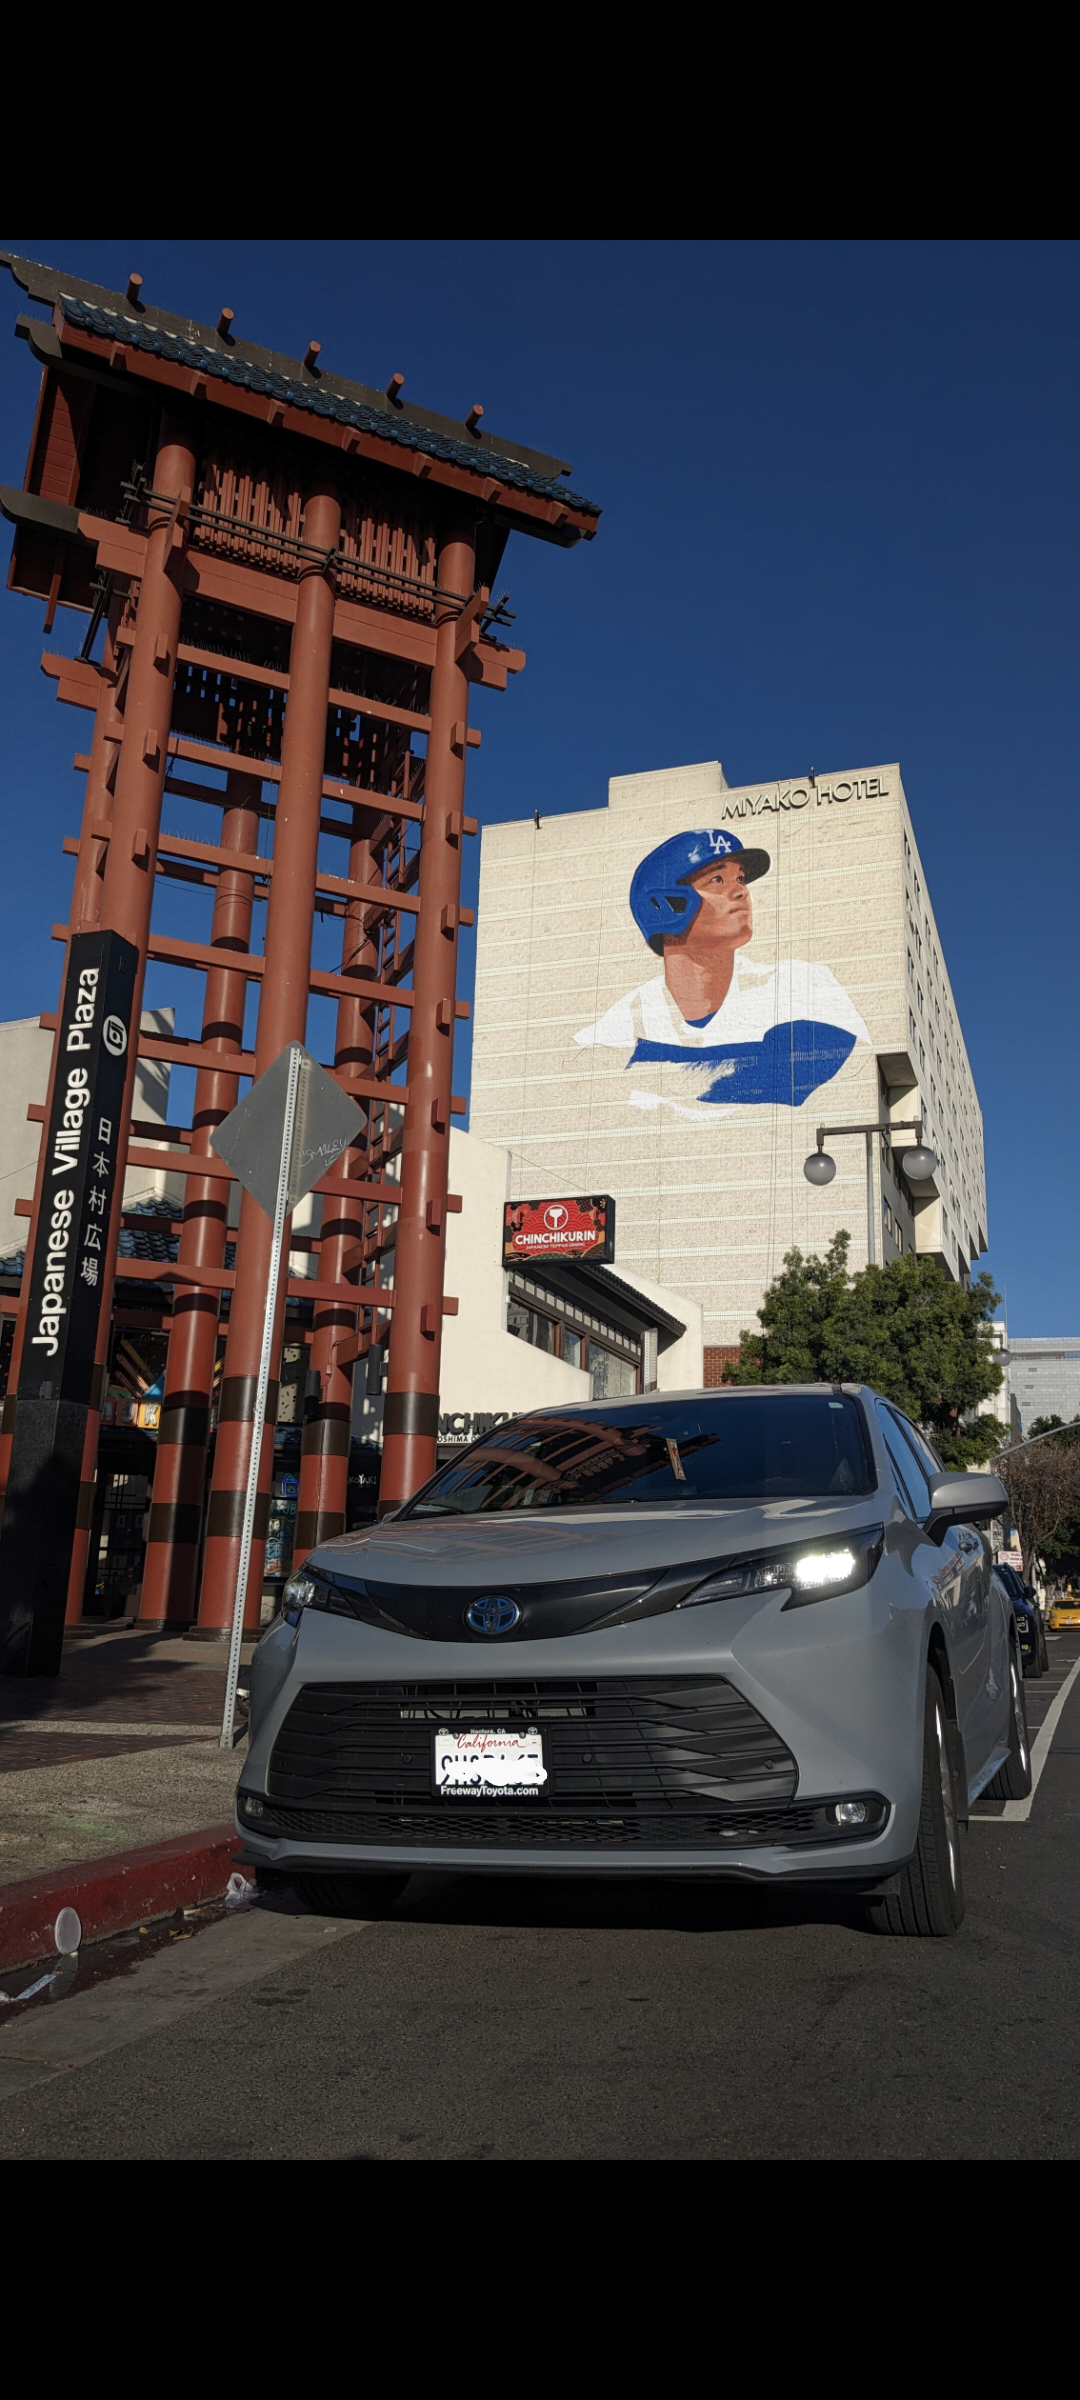 An impressive mural adorns the exterior of the Miyako Hotel Los Angeles, depicting Shohei Ohtani, the dynamic baseball player, in action. Vibrant colors capture the essence of his athleticism and determination, adding a touch of excitement to the urban landscape."